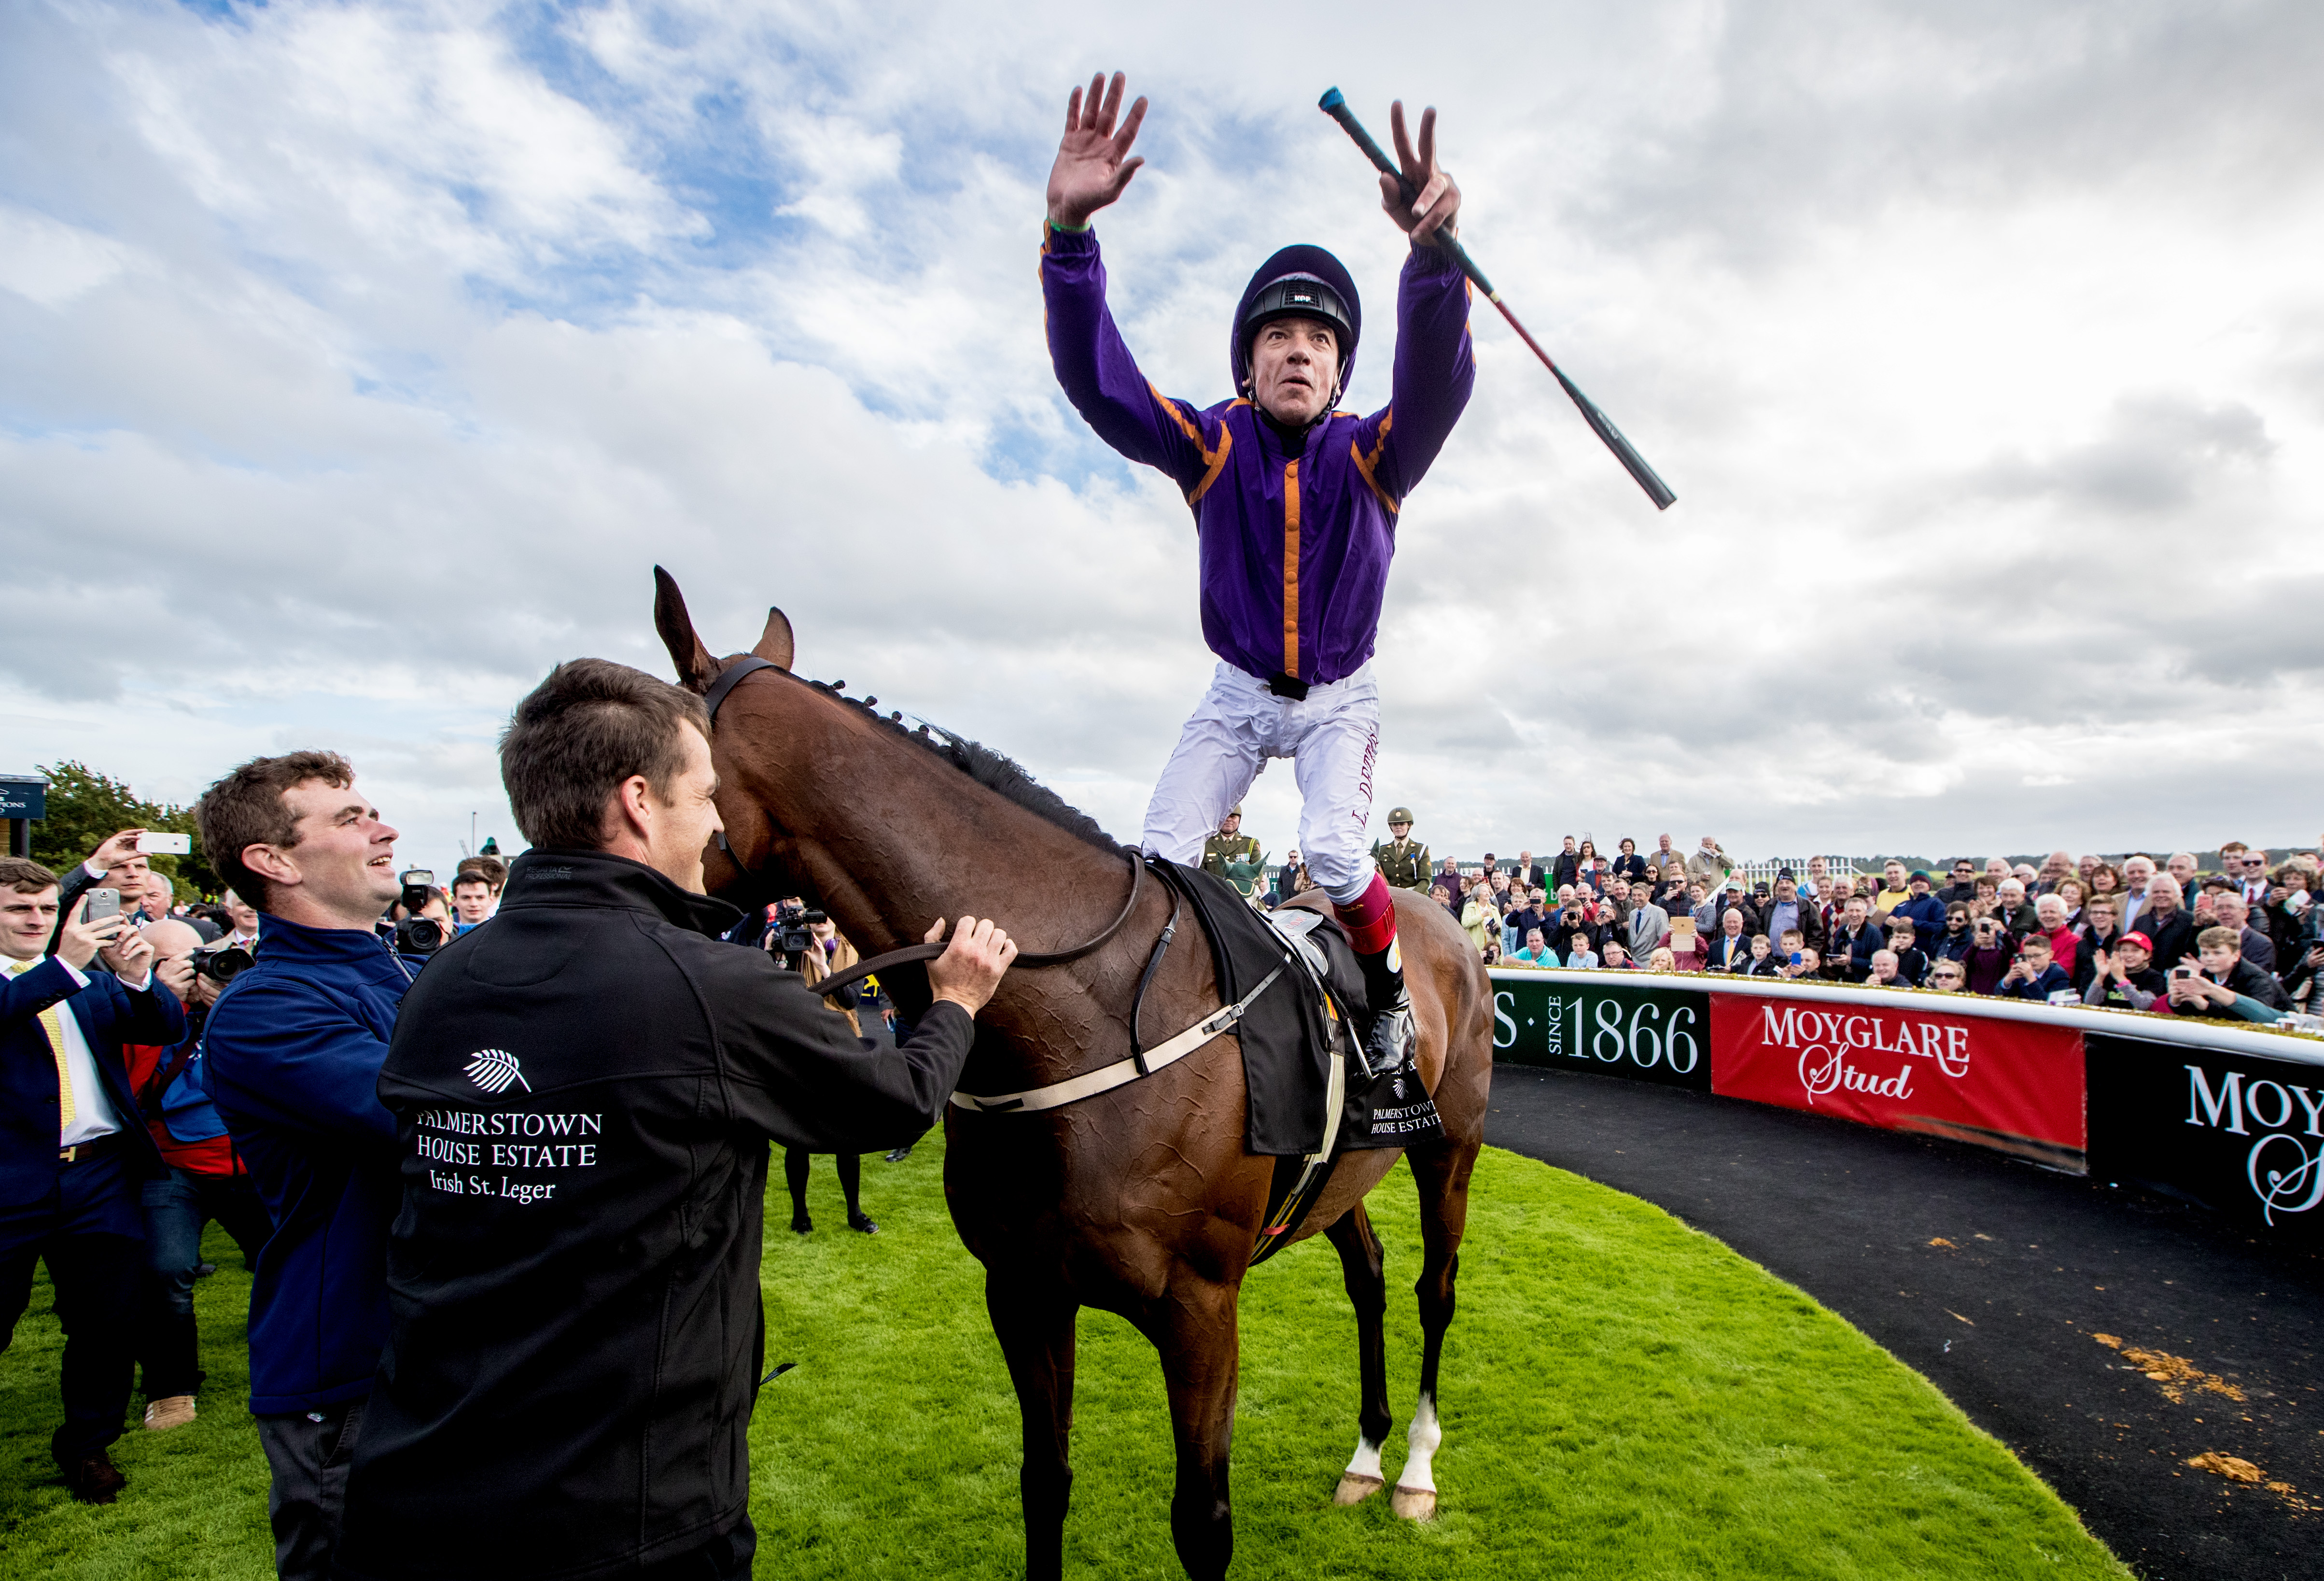 Longines Irish Champions Weekend, The Curragh Racecourse, Kildare 11/9/2016 The Palmerstown House Estate Irish St. Leger (Group 1) Jockey Frankie Dettori celebrates after winning on board Wicklow Brave Mandatory Credit ©INPHO/James Crombie